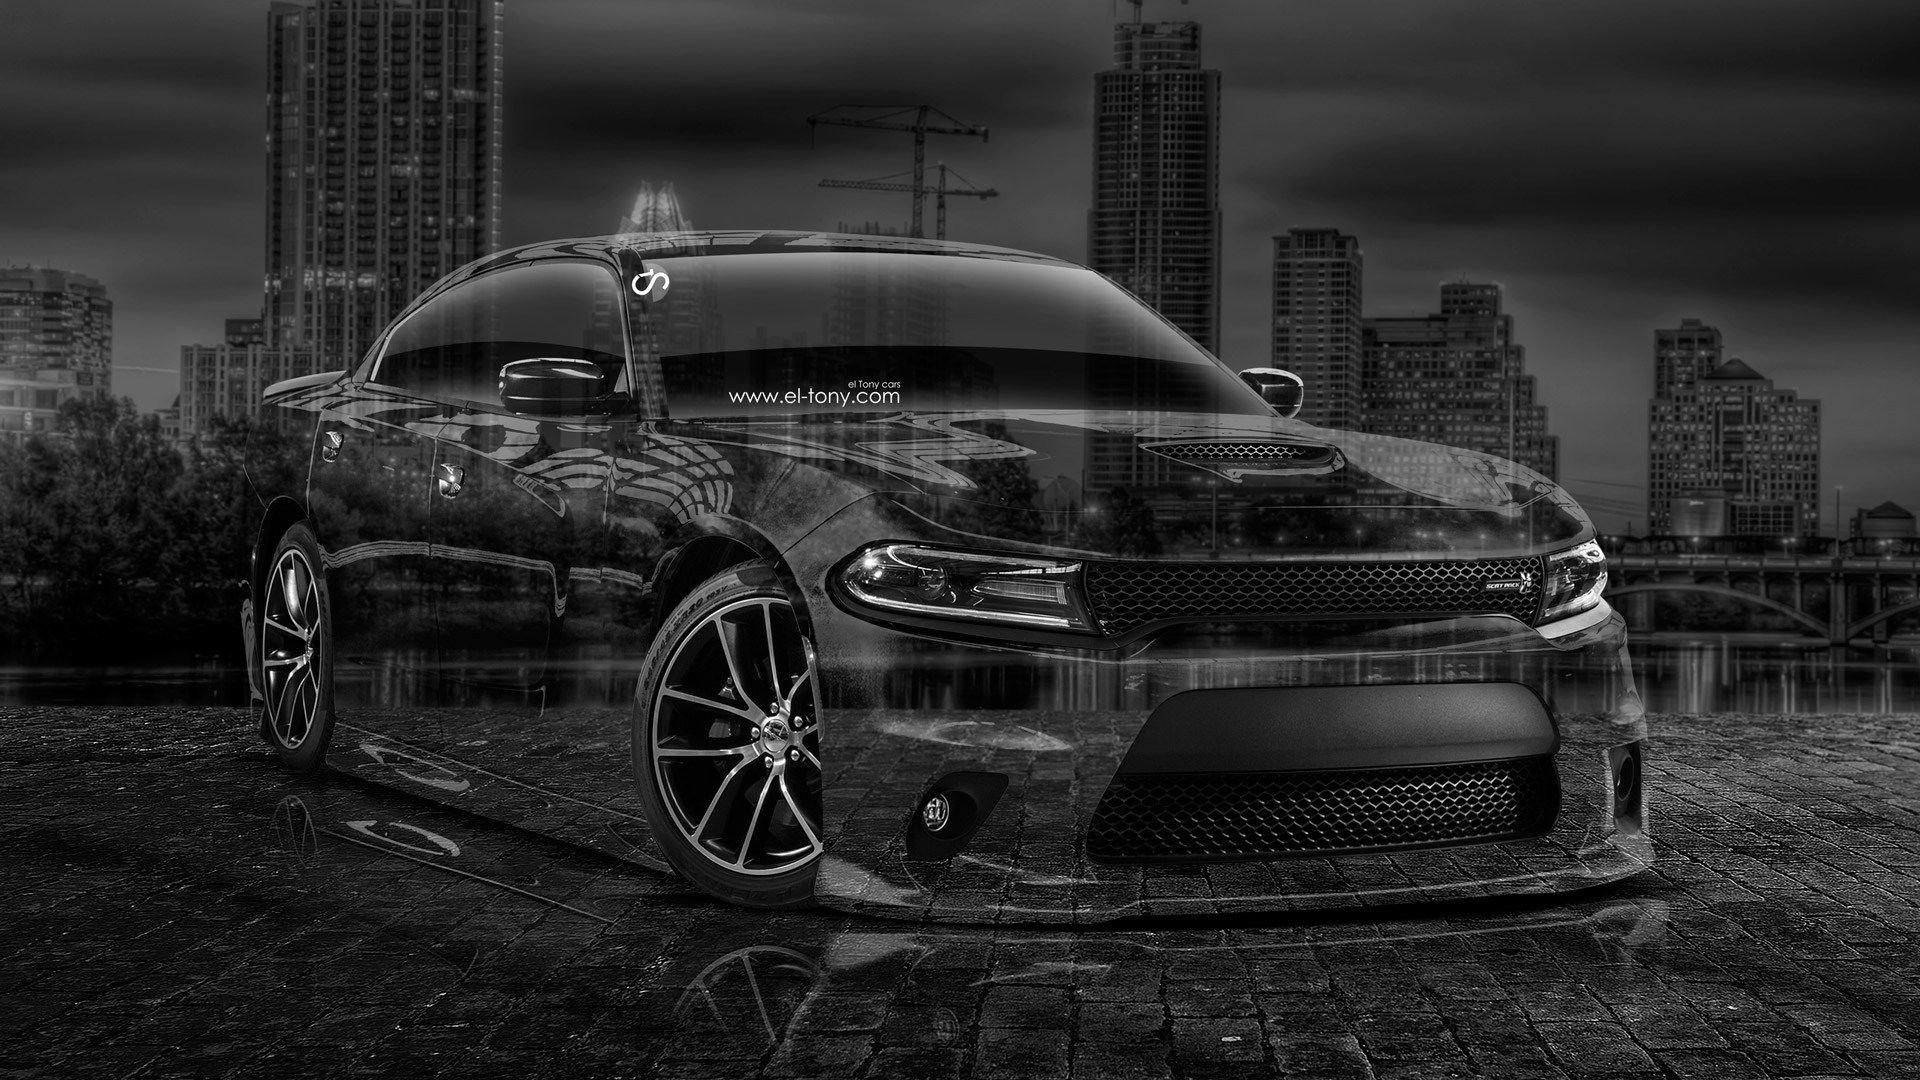 Black Dodge Charger Wallpapers - Top Free Black Dodge Charger